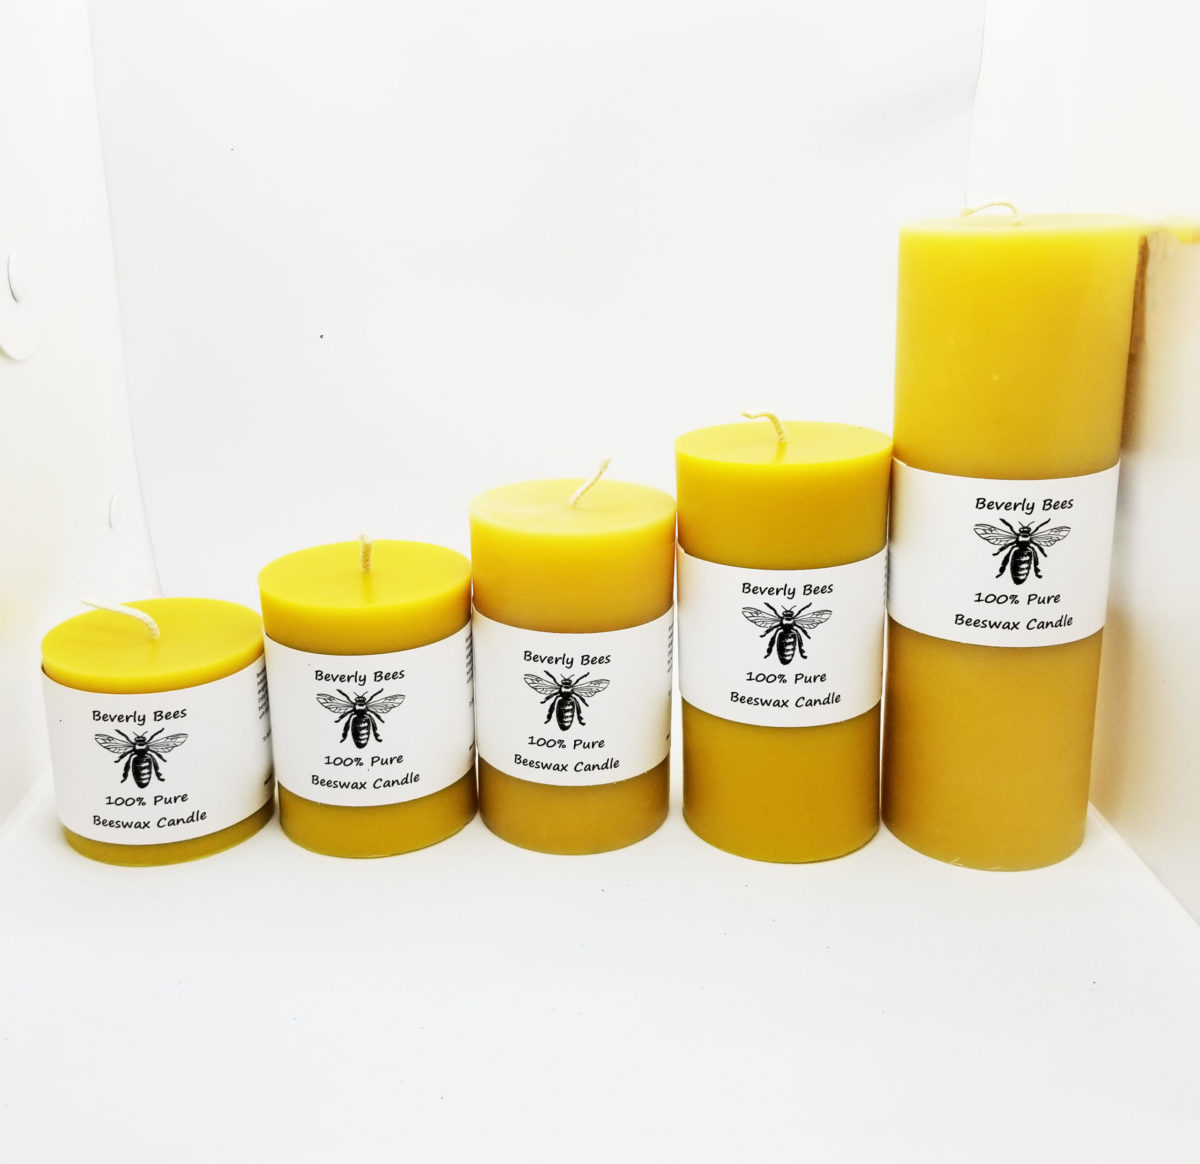 Black Beeswax Gift Set 3 Colored Pillar Beeswax Candles with Honey Scent Size 3.3 x 1.8 in and Hand-Made Charm for Gift and Home Decor